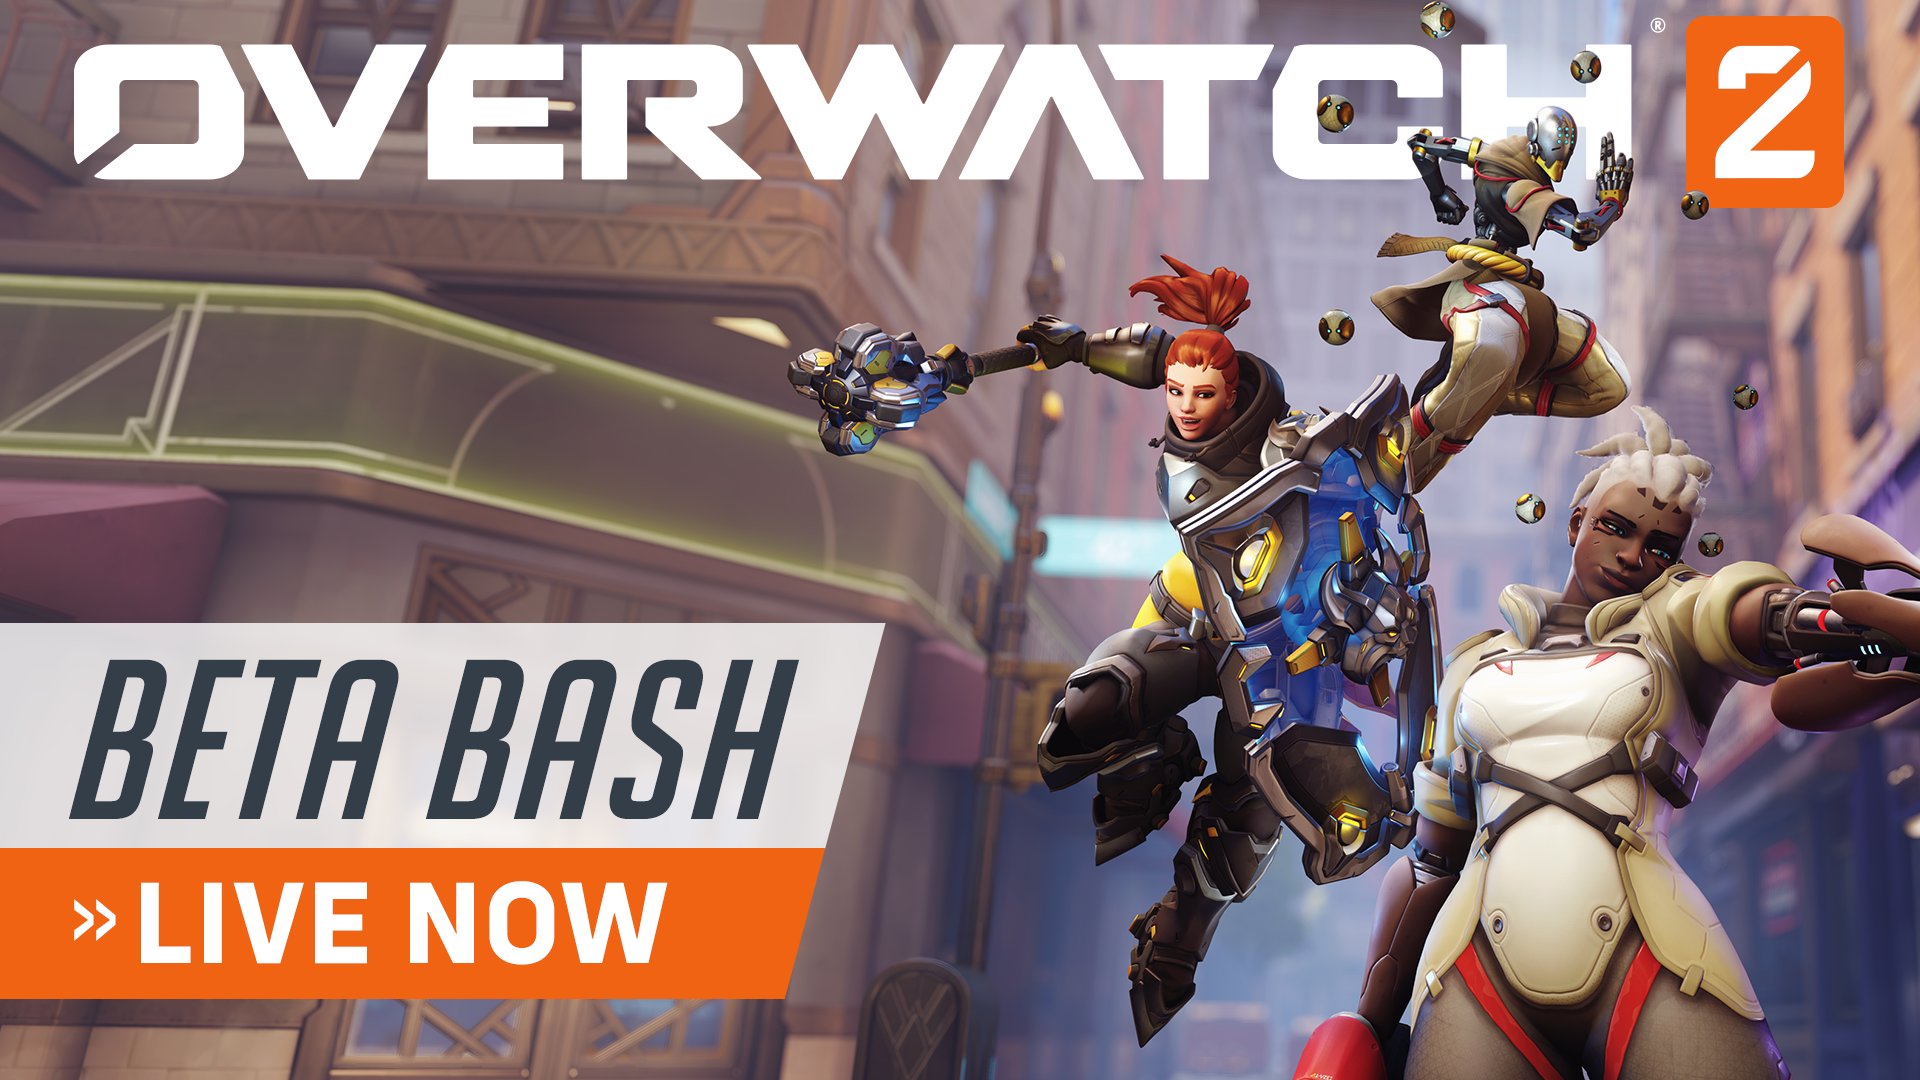 Twitter 上的overwatch The Beta Bash Is Now Live Ow Content Creator 5v5 Overwatch2 Pvp Gameplay Shoutcasted Matches Dev Interviews Ow2 Beta Twitch Drops T Co 9zxnqbktxt T Co 8yxlimu9fr